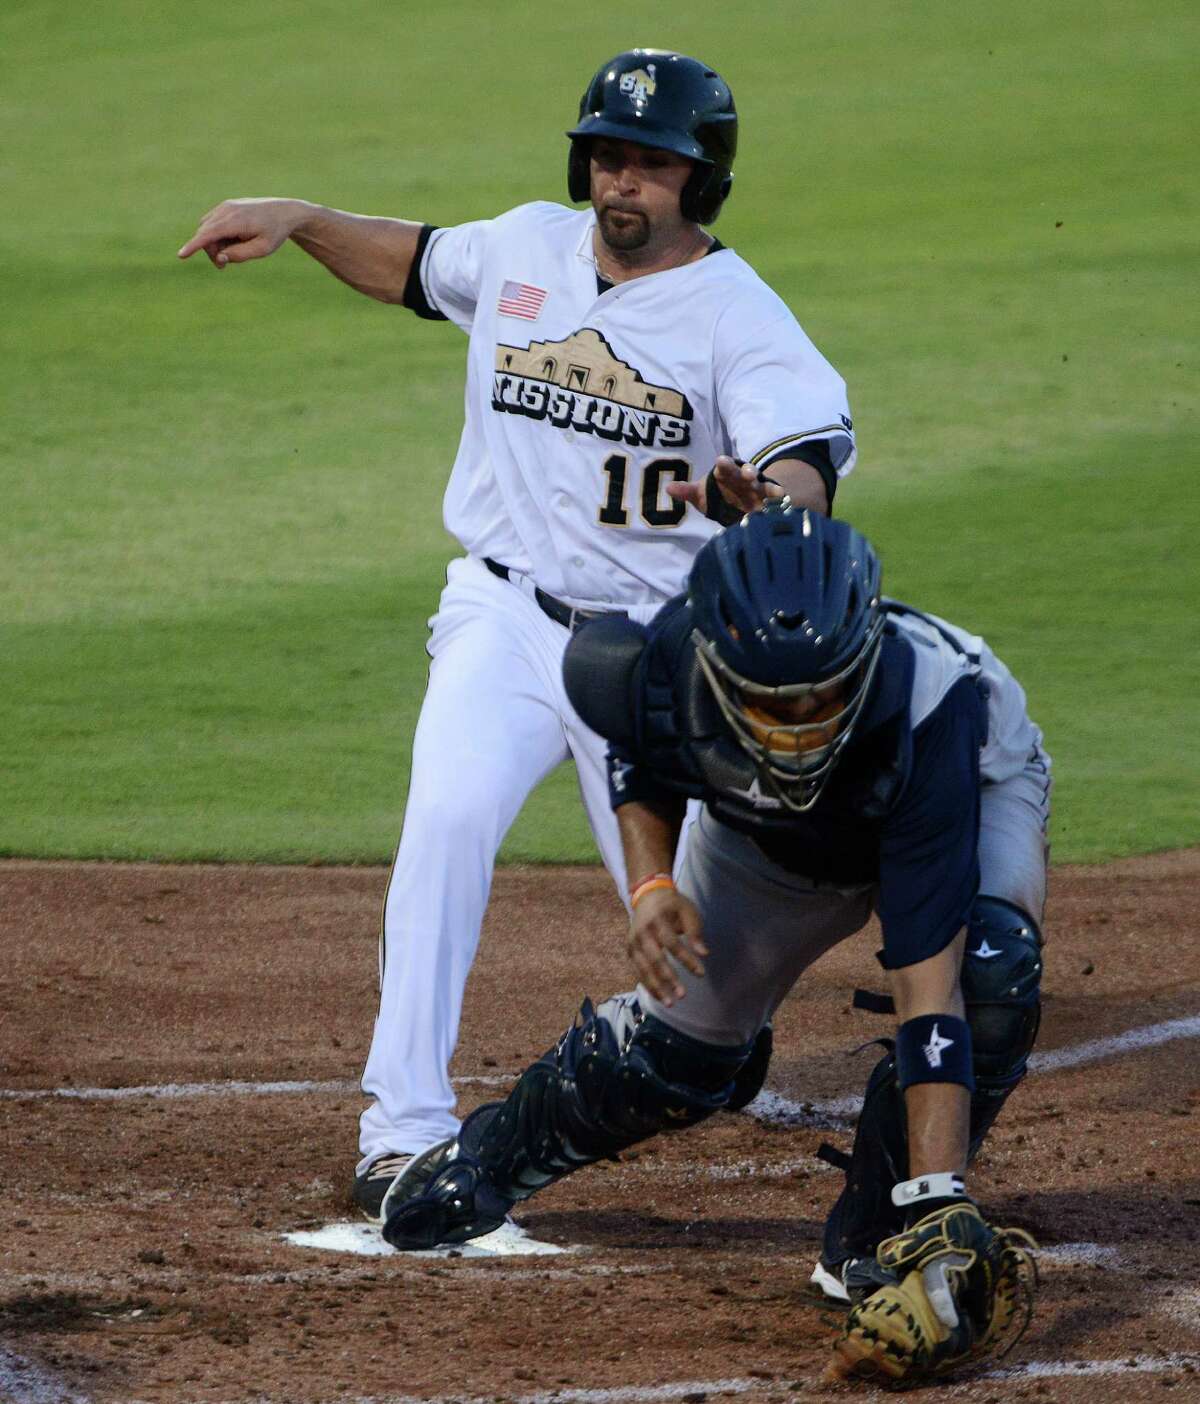 Jake Blackwood of the San Antonio Missions is forced out at home by Corpus Christi catcher Carlos Corporan in the second inning of Texas League playoffs action at Wolff Stadium on Saturday, Sept. 7, 2013.